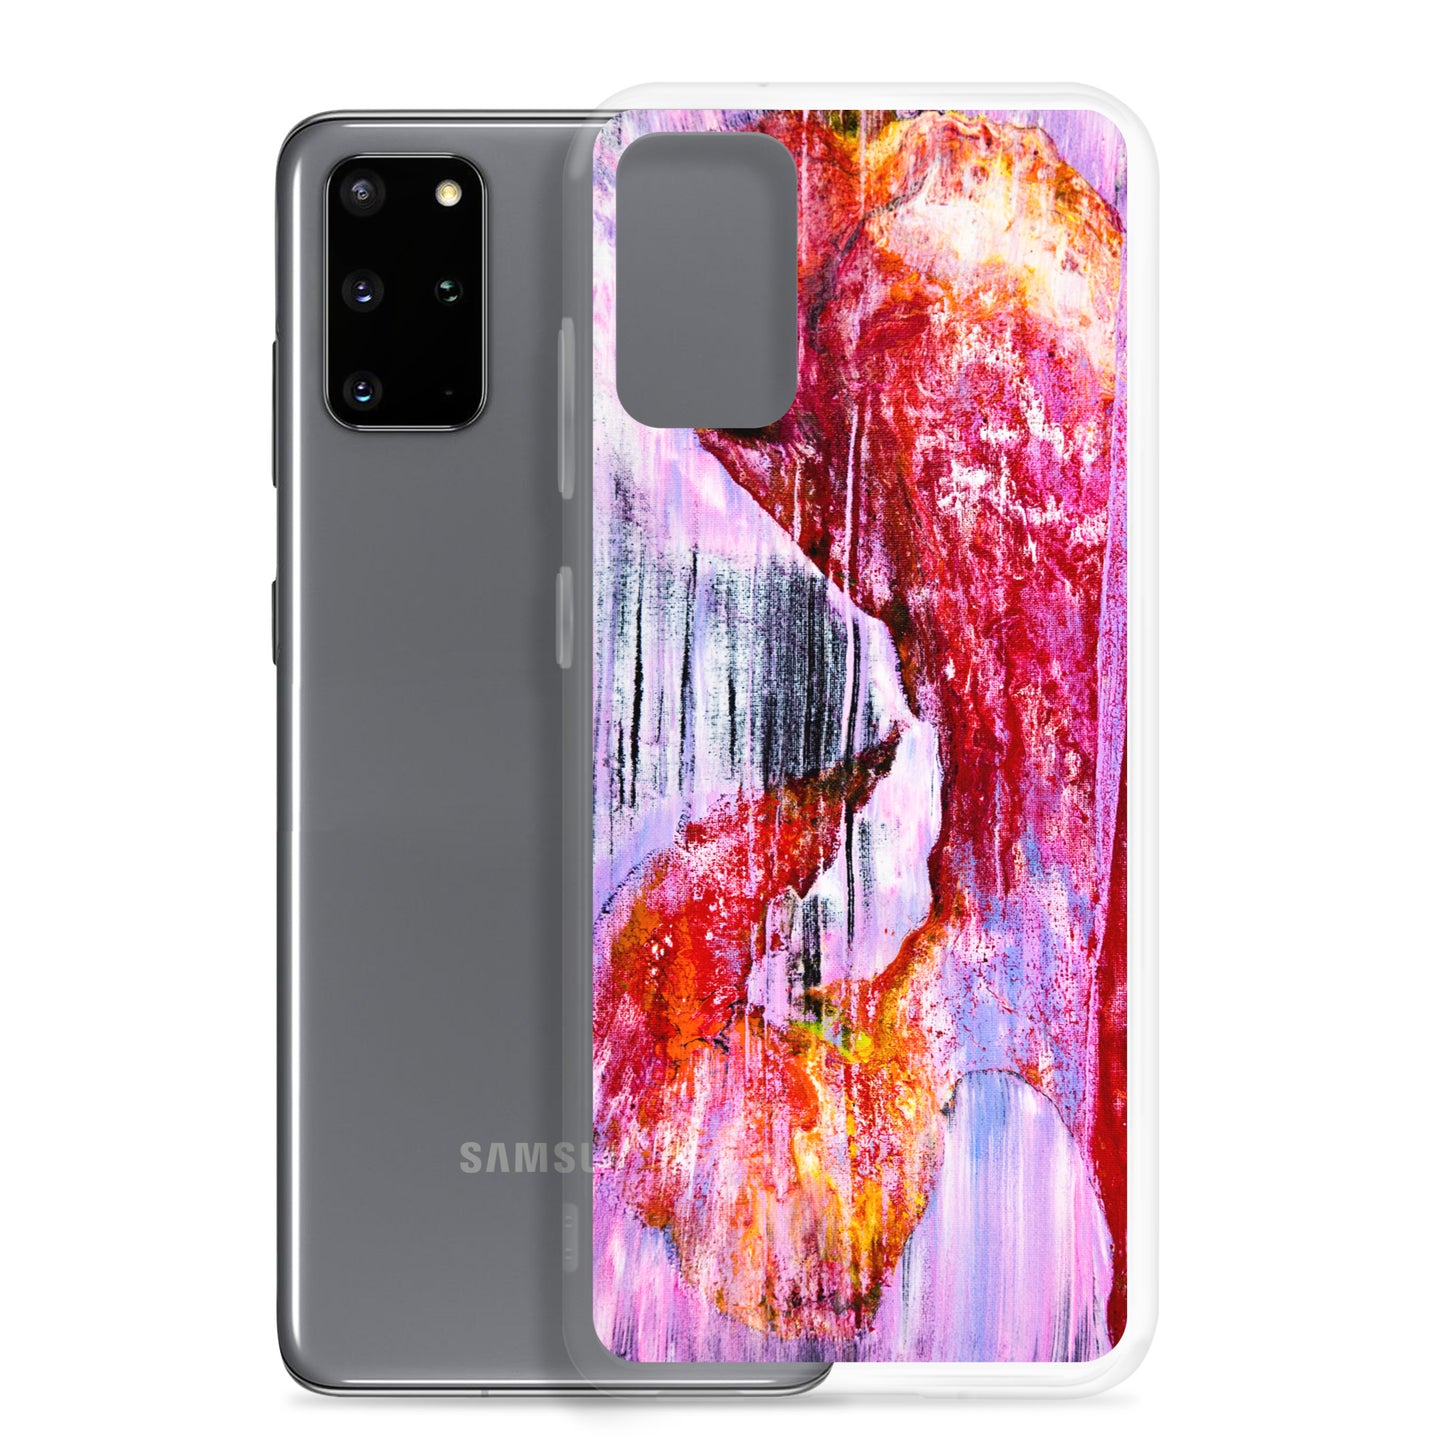 NightOwl Studio Custom Phone Case Compatible with Samsung Galaxy, Slim Cover for Wireless Charging, Drop and Scratch Resistant, Pink Rain